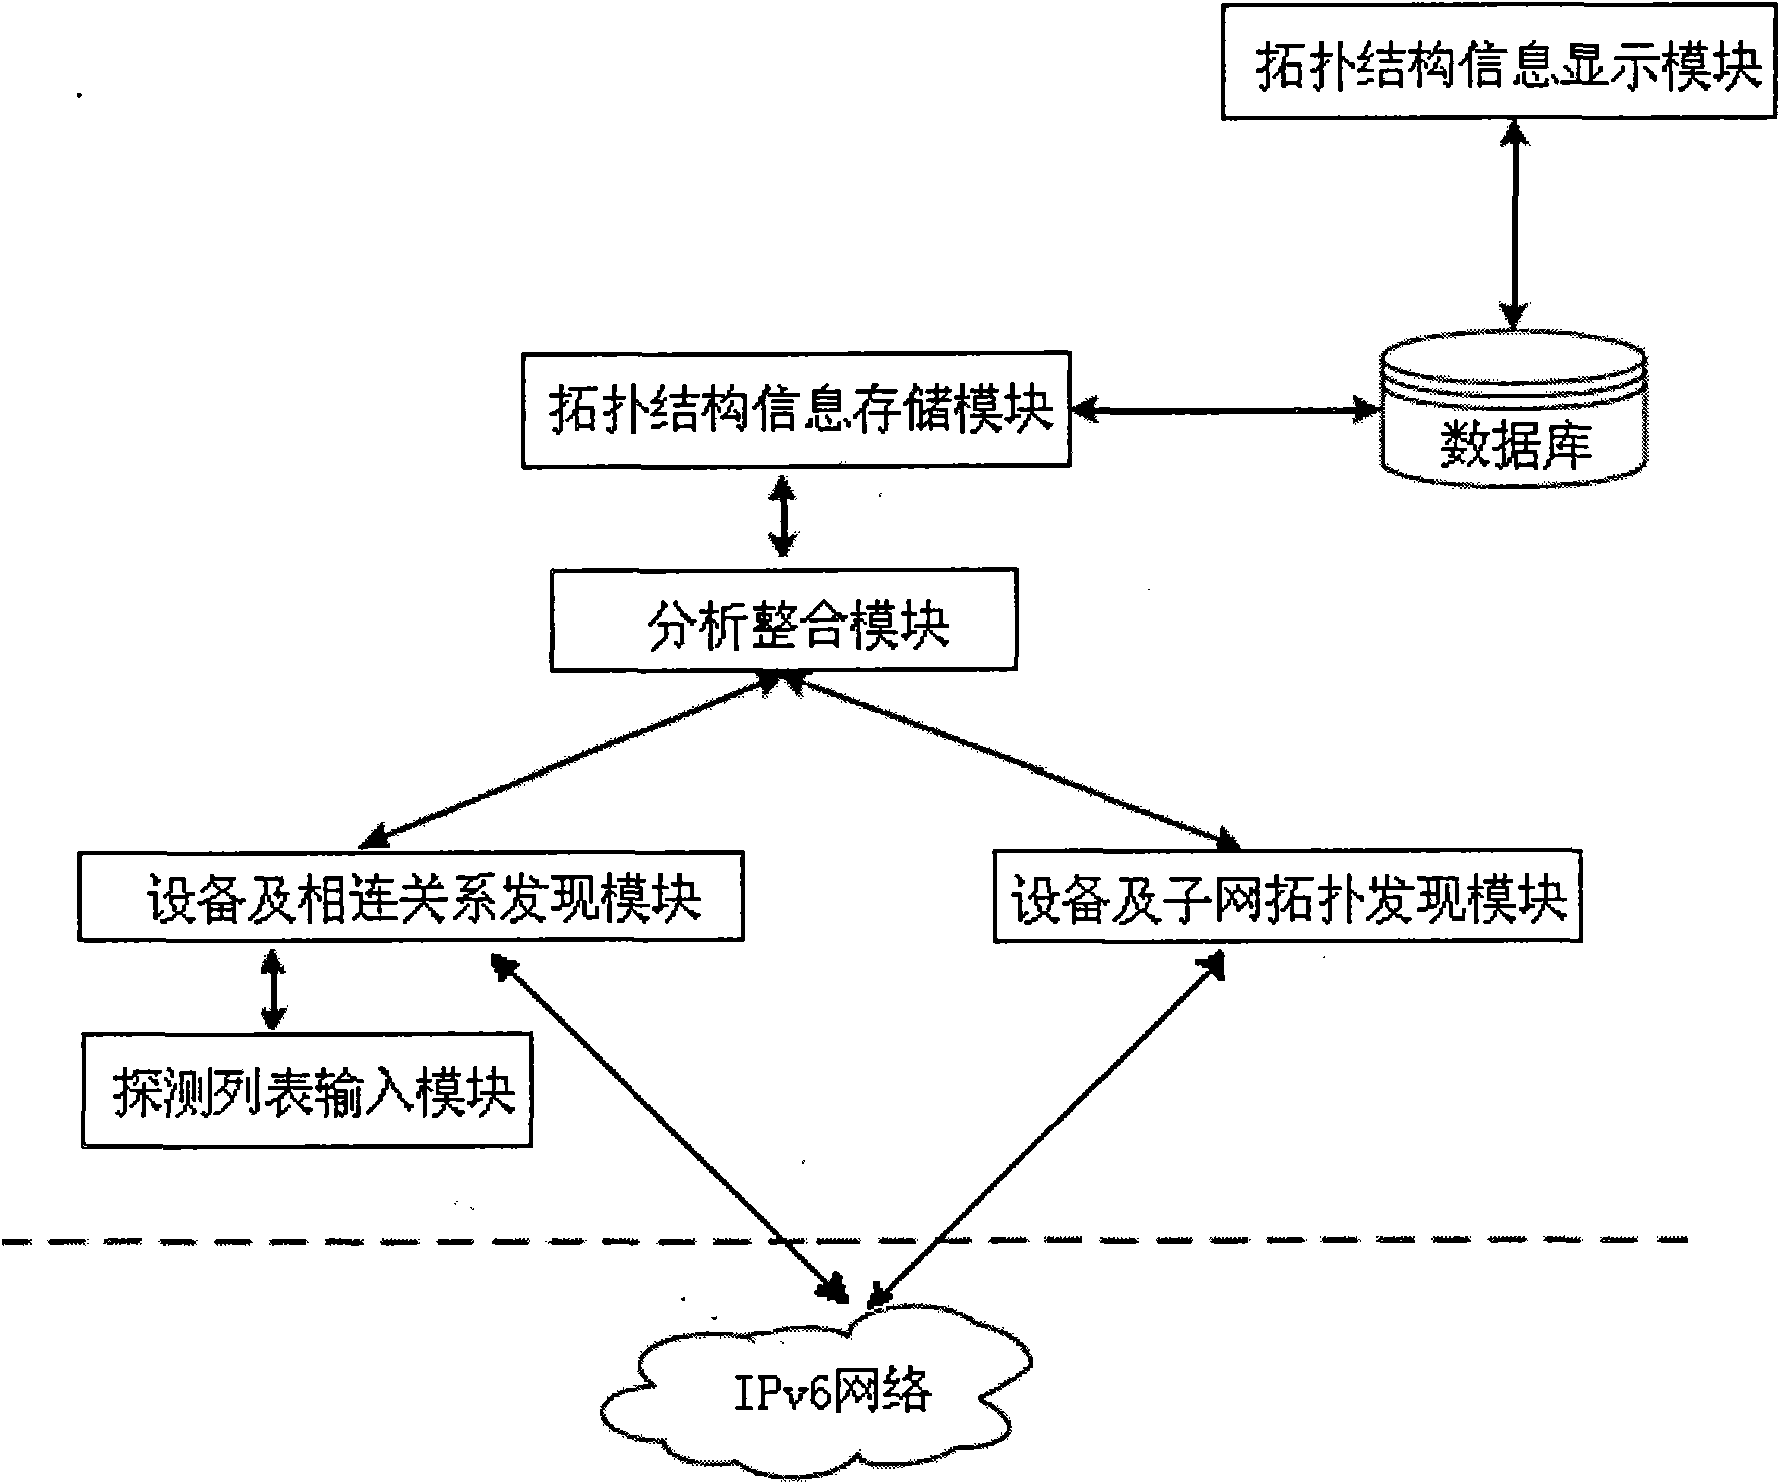 Topology discovery system of next generation Internet based on IPv6 (Internet Protocol Version 6) and realizing method thereof